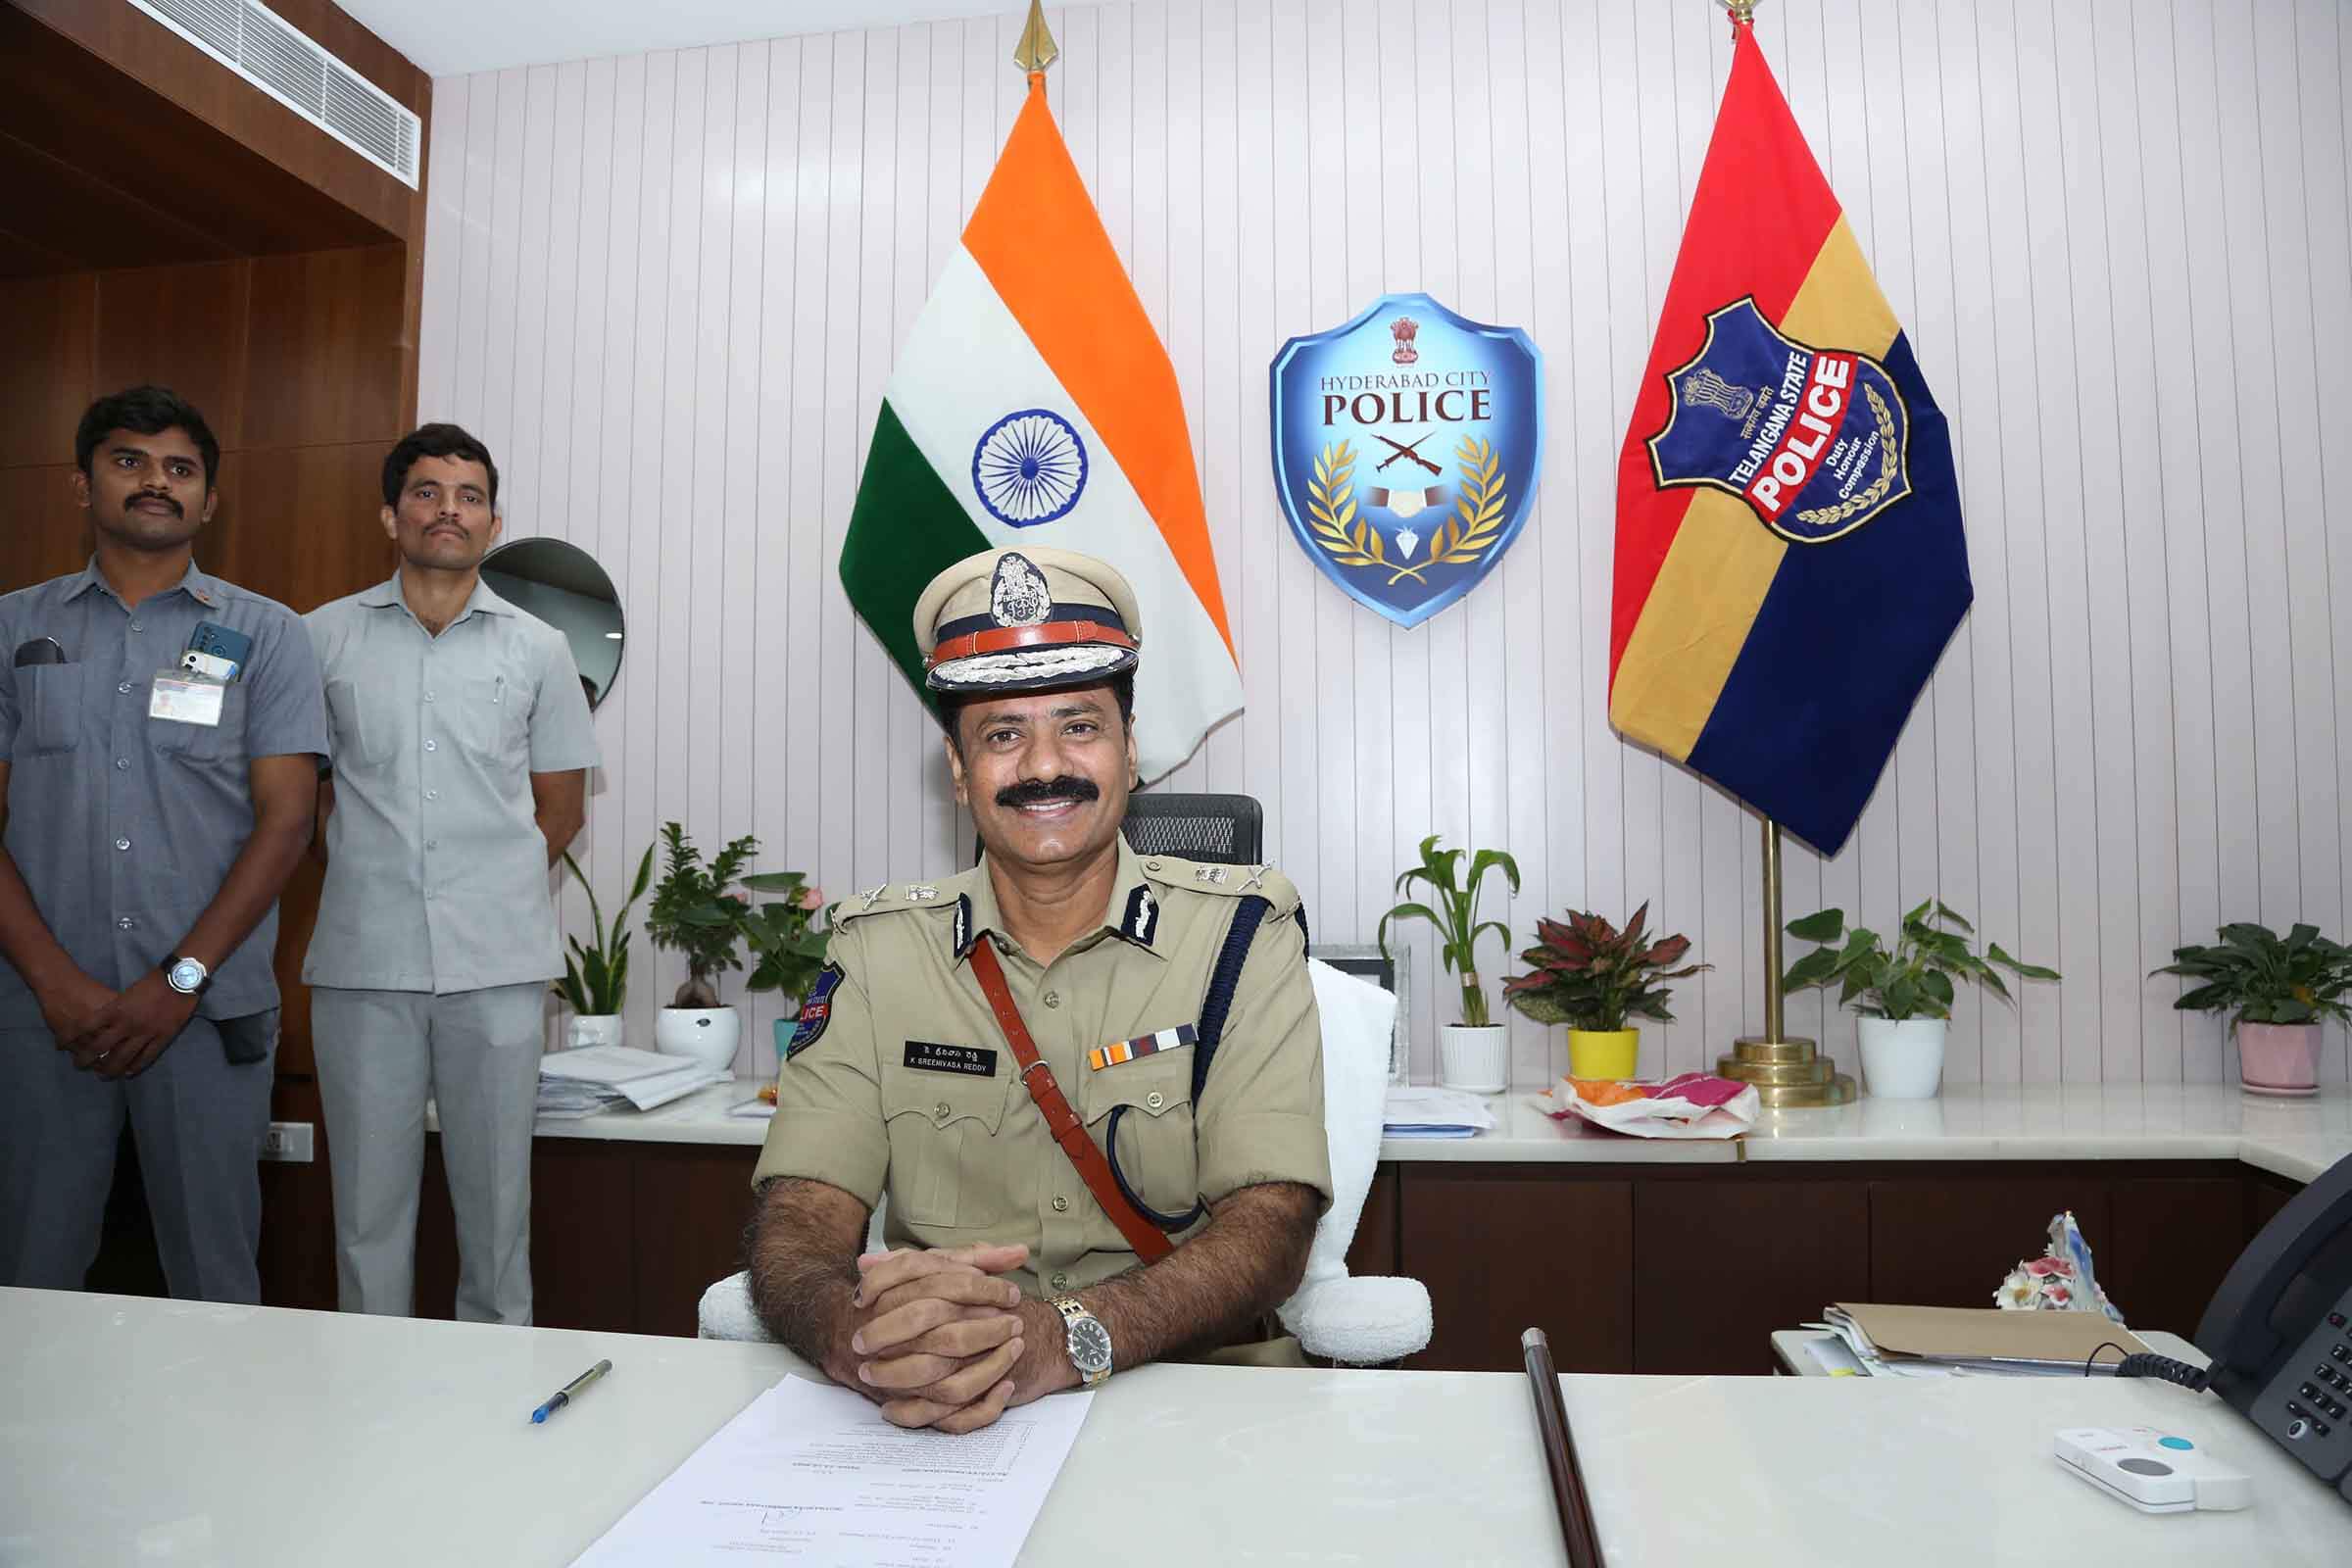 Elaborate arrangements to be taken up for smooth conduct of Bakrid: Hyderabad CP